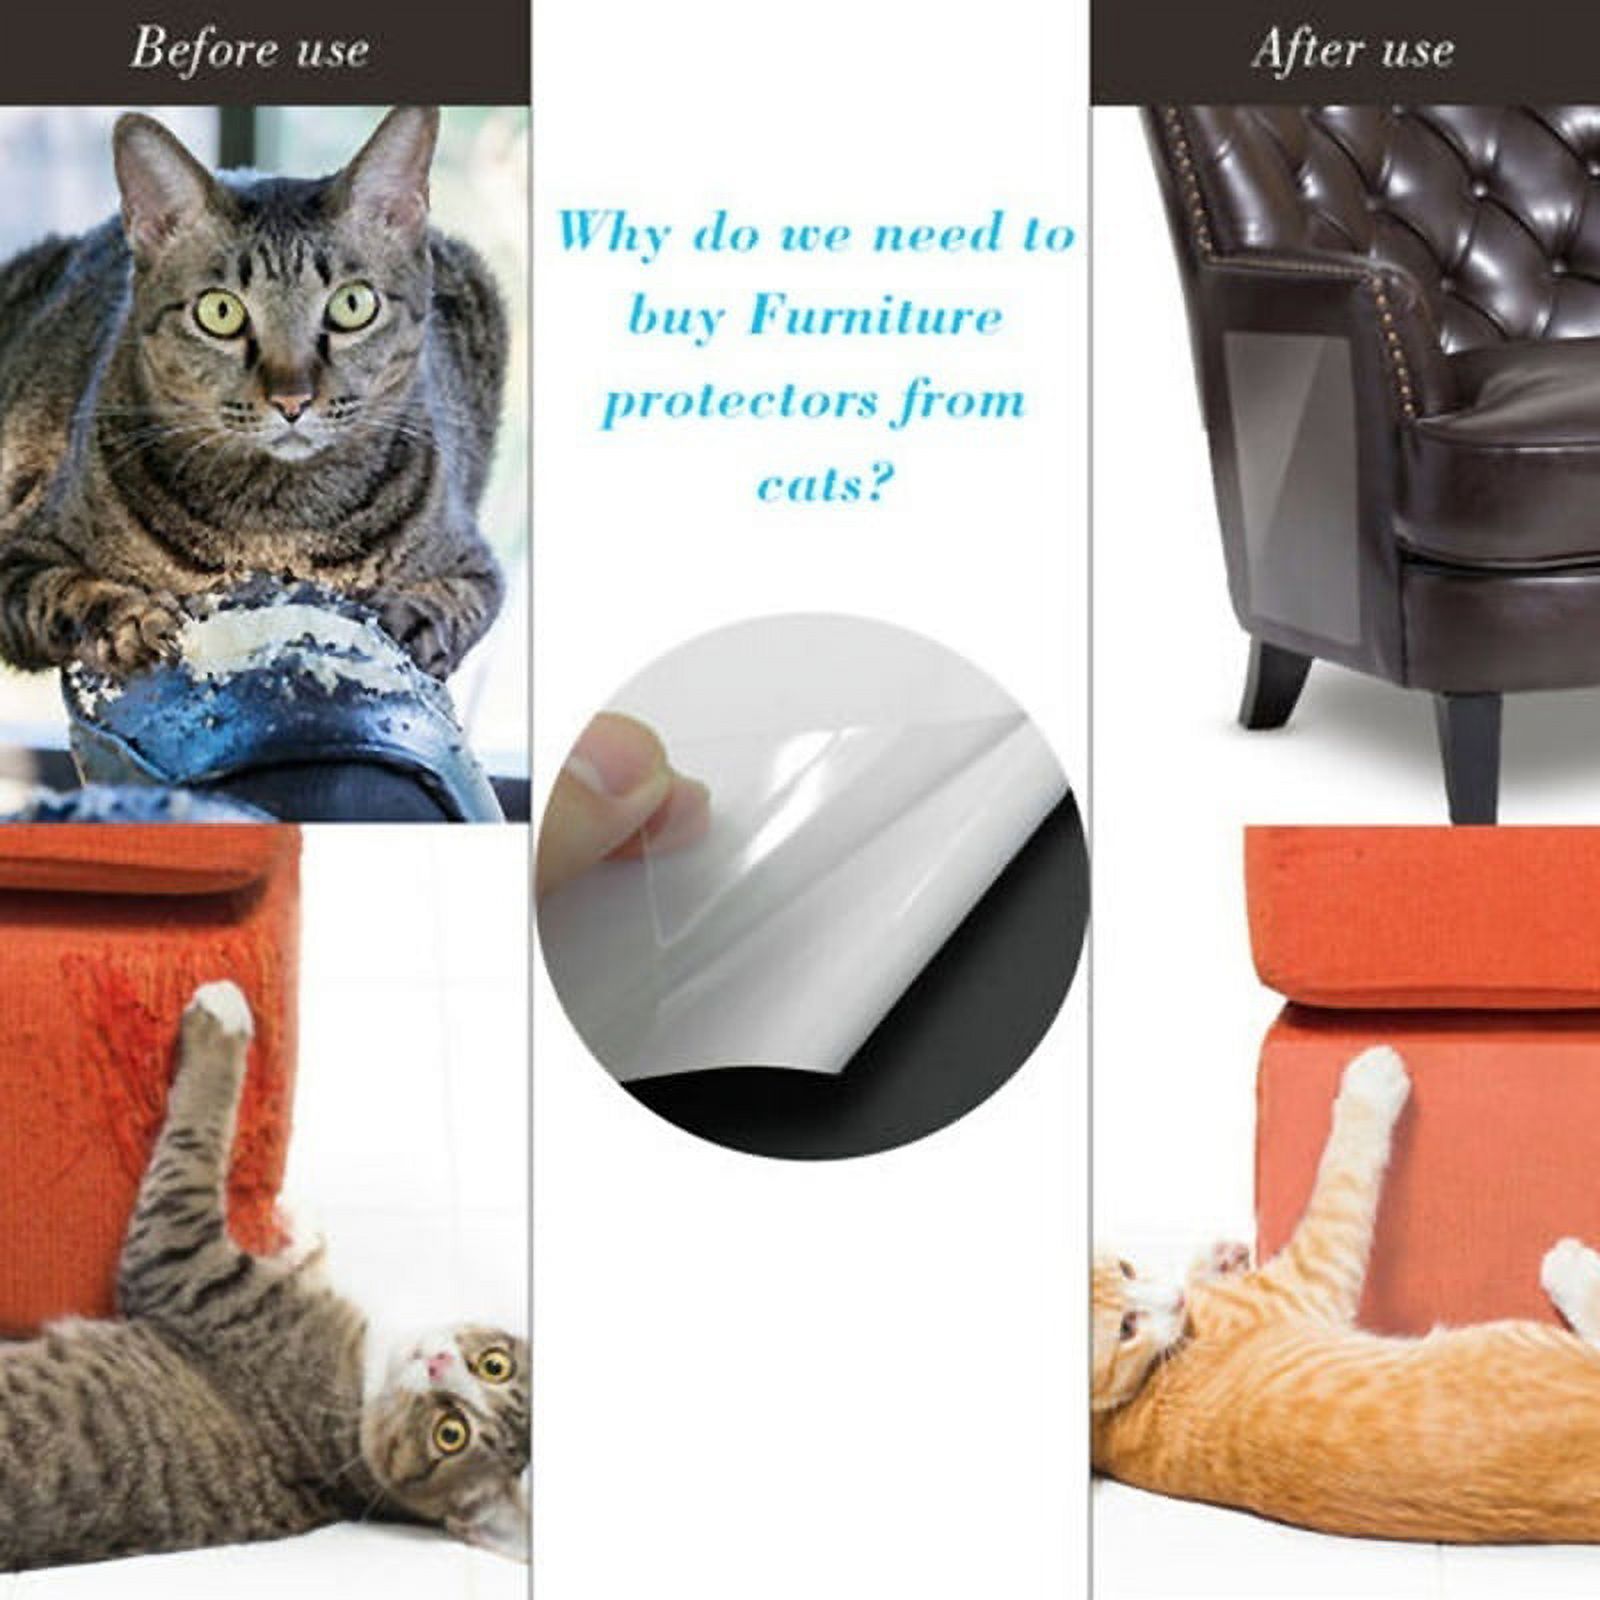 2/4/6/10PCS Couch Guard Cat Anti-Scratching Protector Sofa Furniture Self-Adhesive Cat Scratching Guard Cat Furniture Sofa Anti-Scratch Sticker for Cat Scratching or Clawing Furniture Protector - image 4 of 9